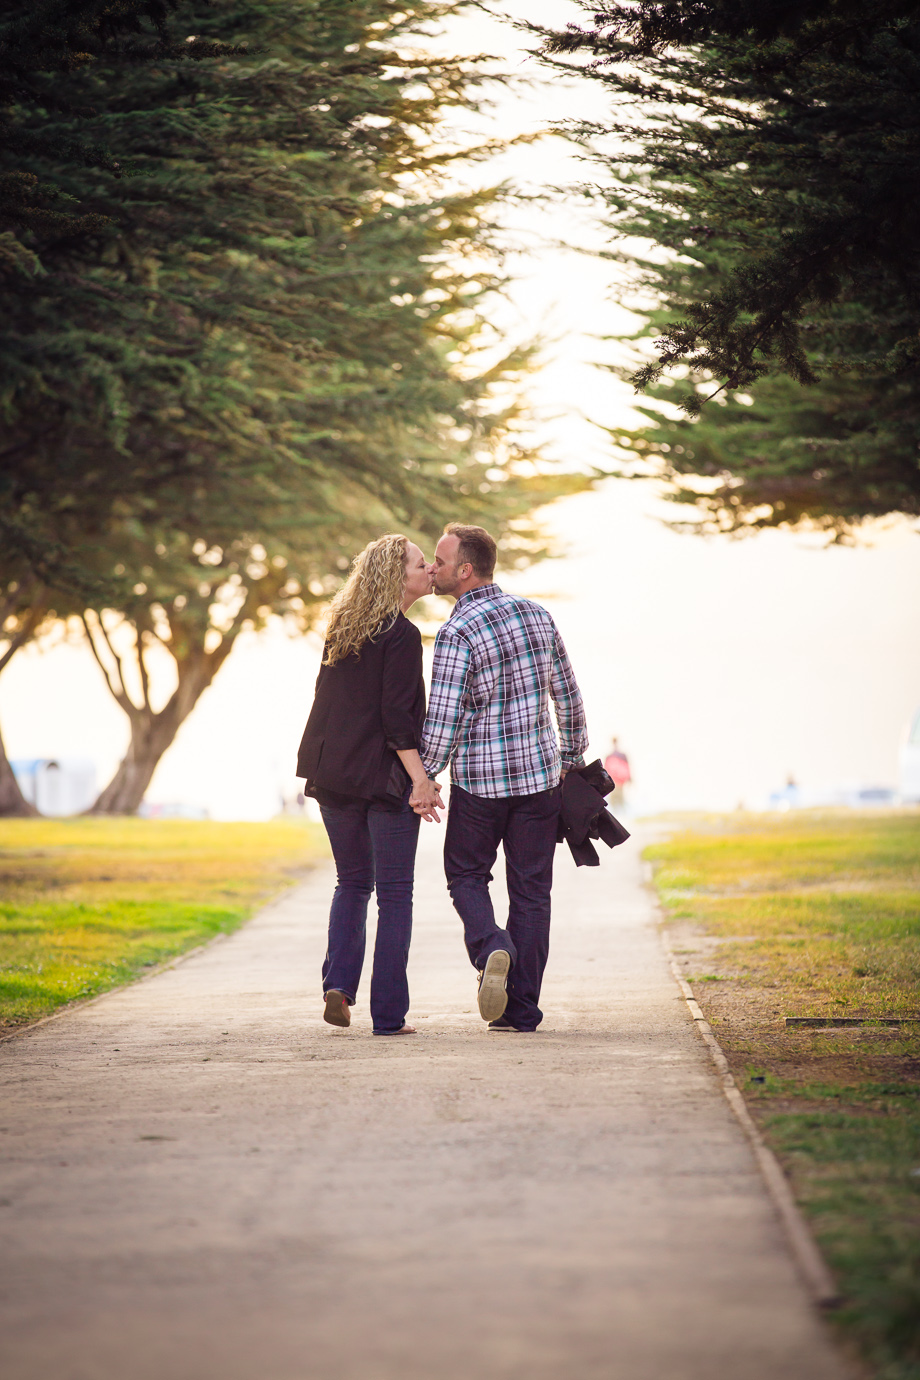 A romantic shot from far away - proposal & engagement photo session in San Francisco